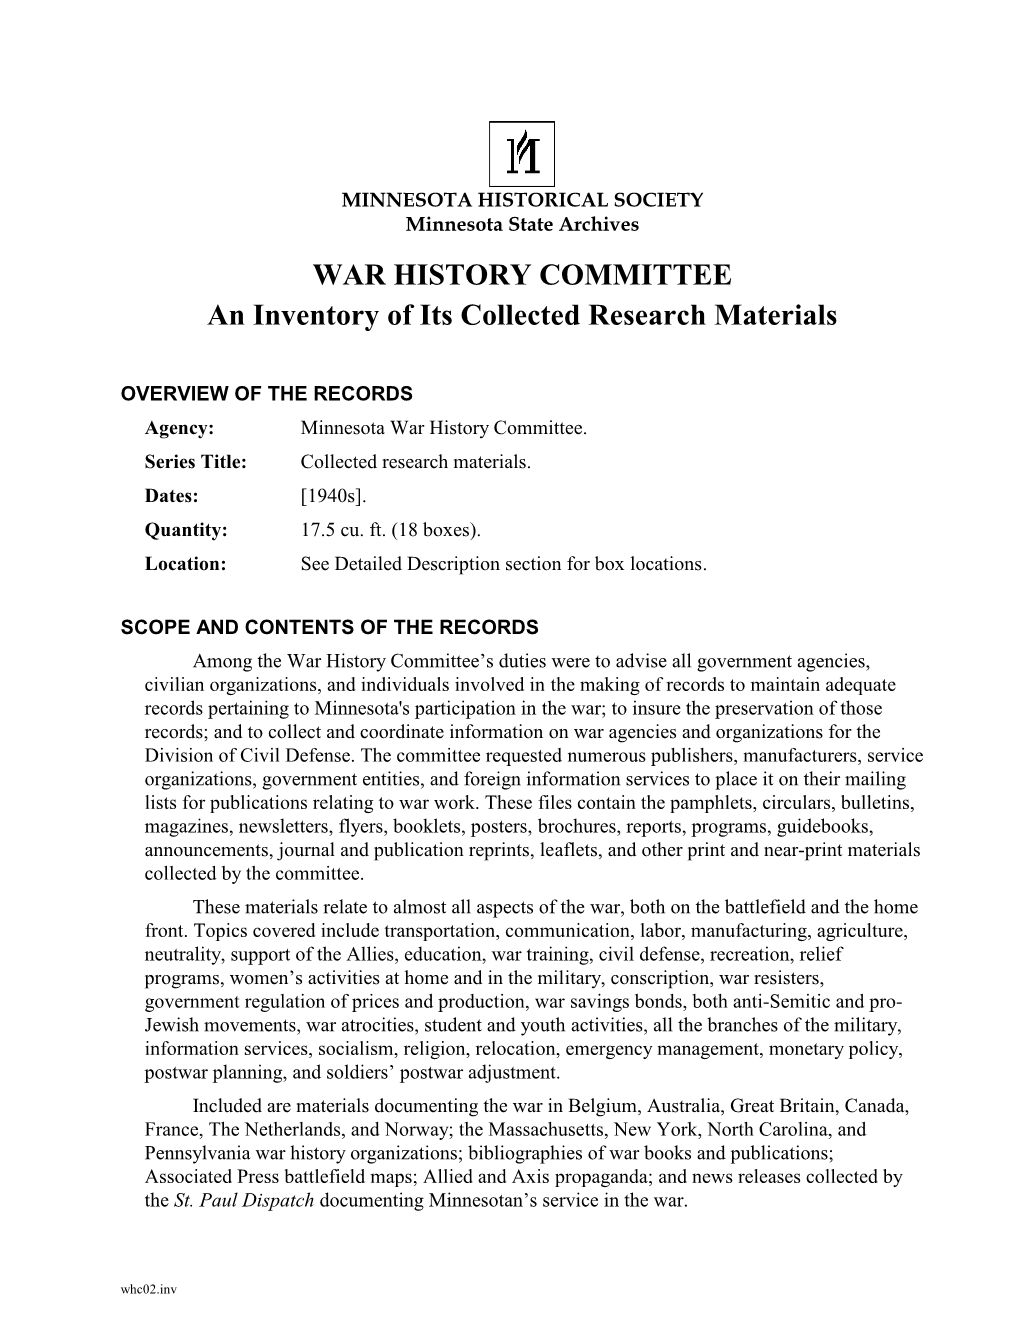 WAR HISTORY COMMITTEE an Inventory of Its Collected Research Materials